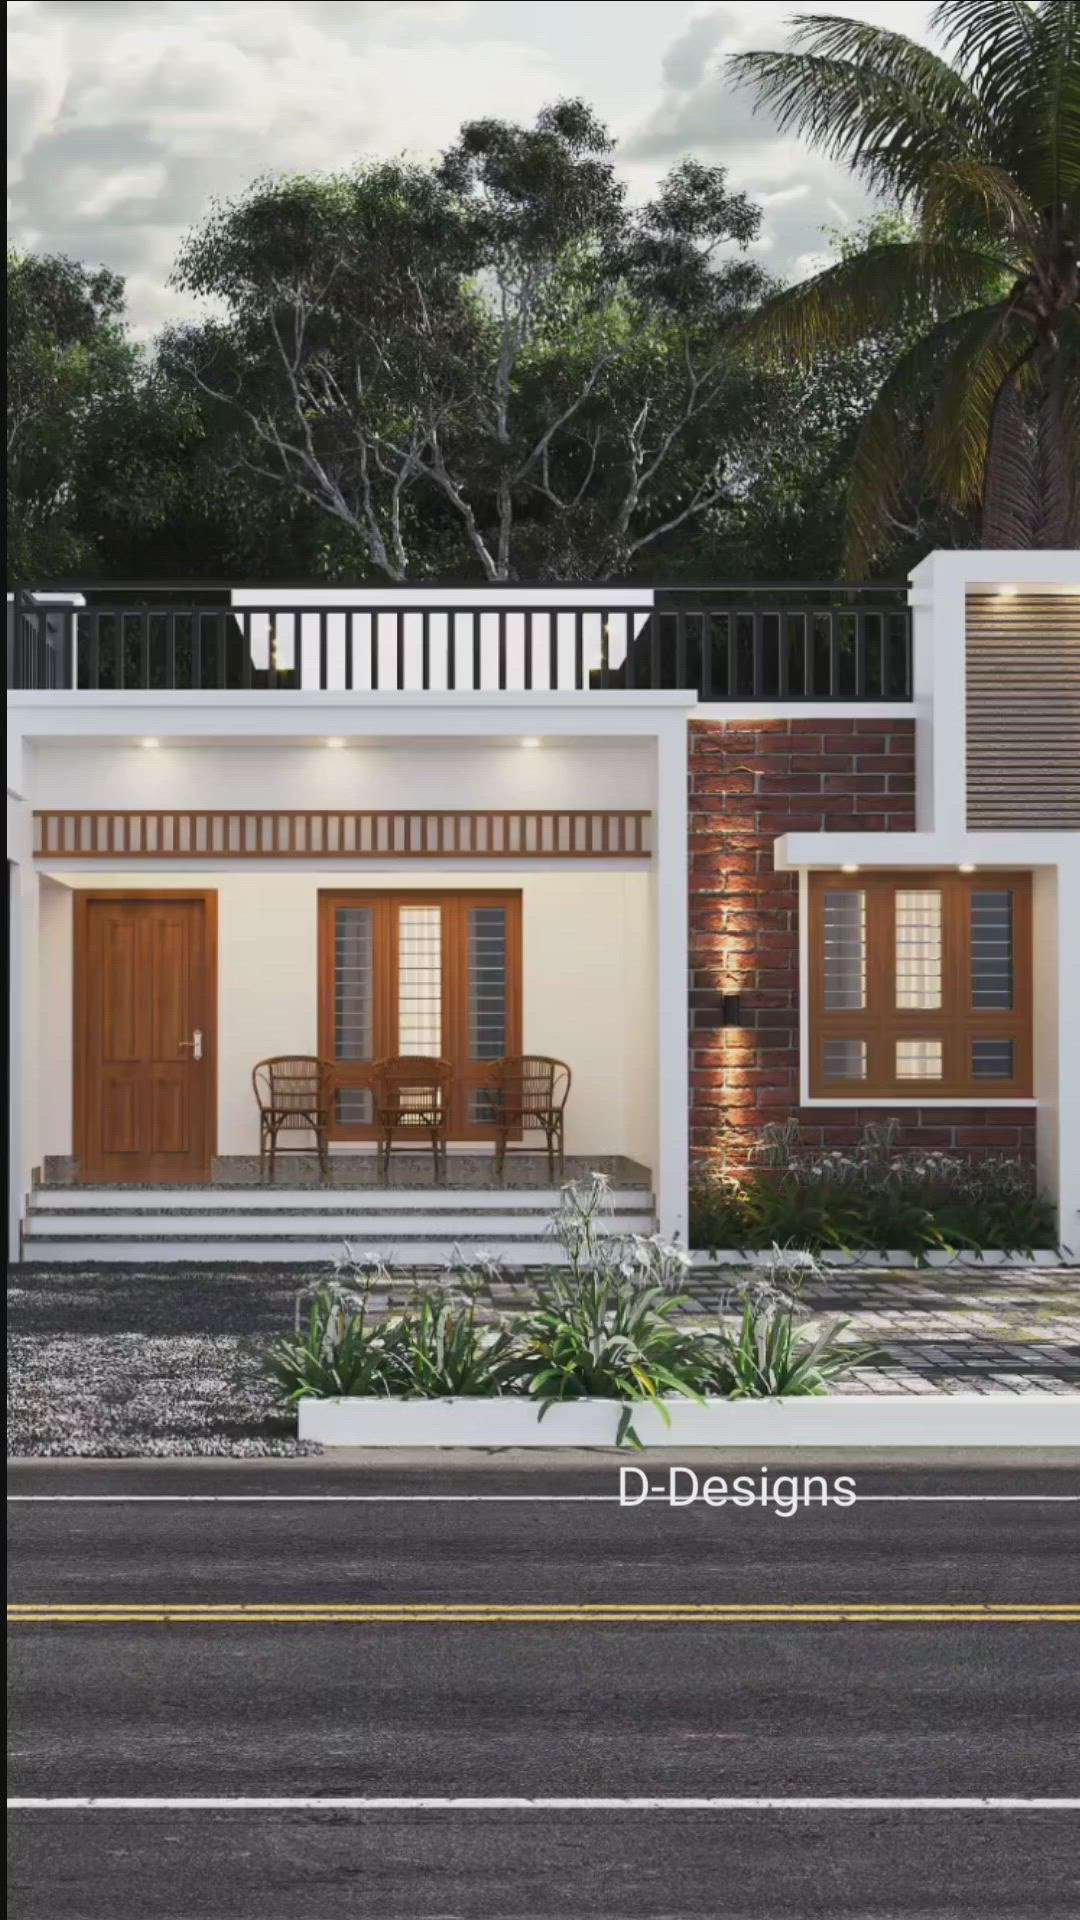 Exterior Designing |Work @Alappuzha 

Total cost of estimate amount 32lks
Budget friendly Homes
Enquiry for Design
contact :-9946999153
nandhulal11@gmail.com
 #KeralaStyleHouse  #keraladesigns  #keralaplanners #keralahomeplans  #keralahomestyle  #HouseDesigns  #keralahomeinterior